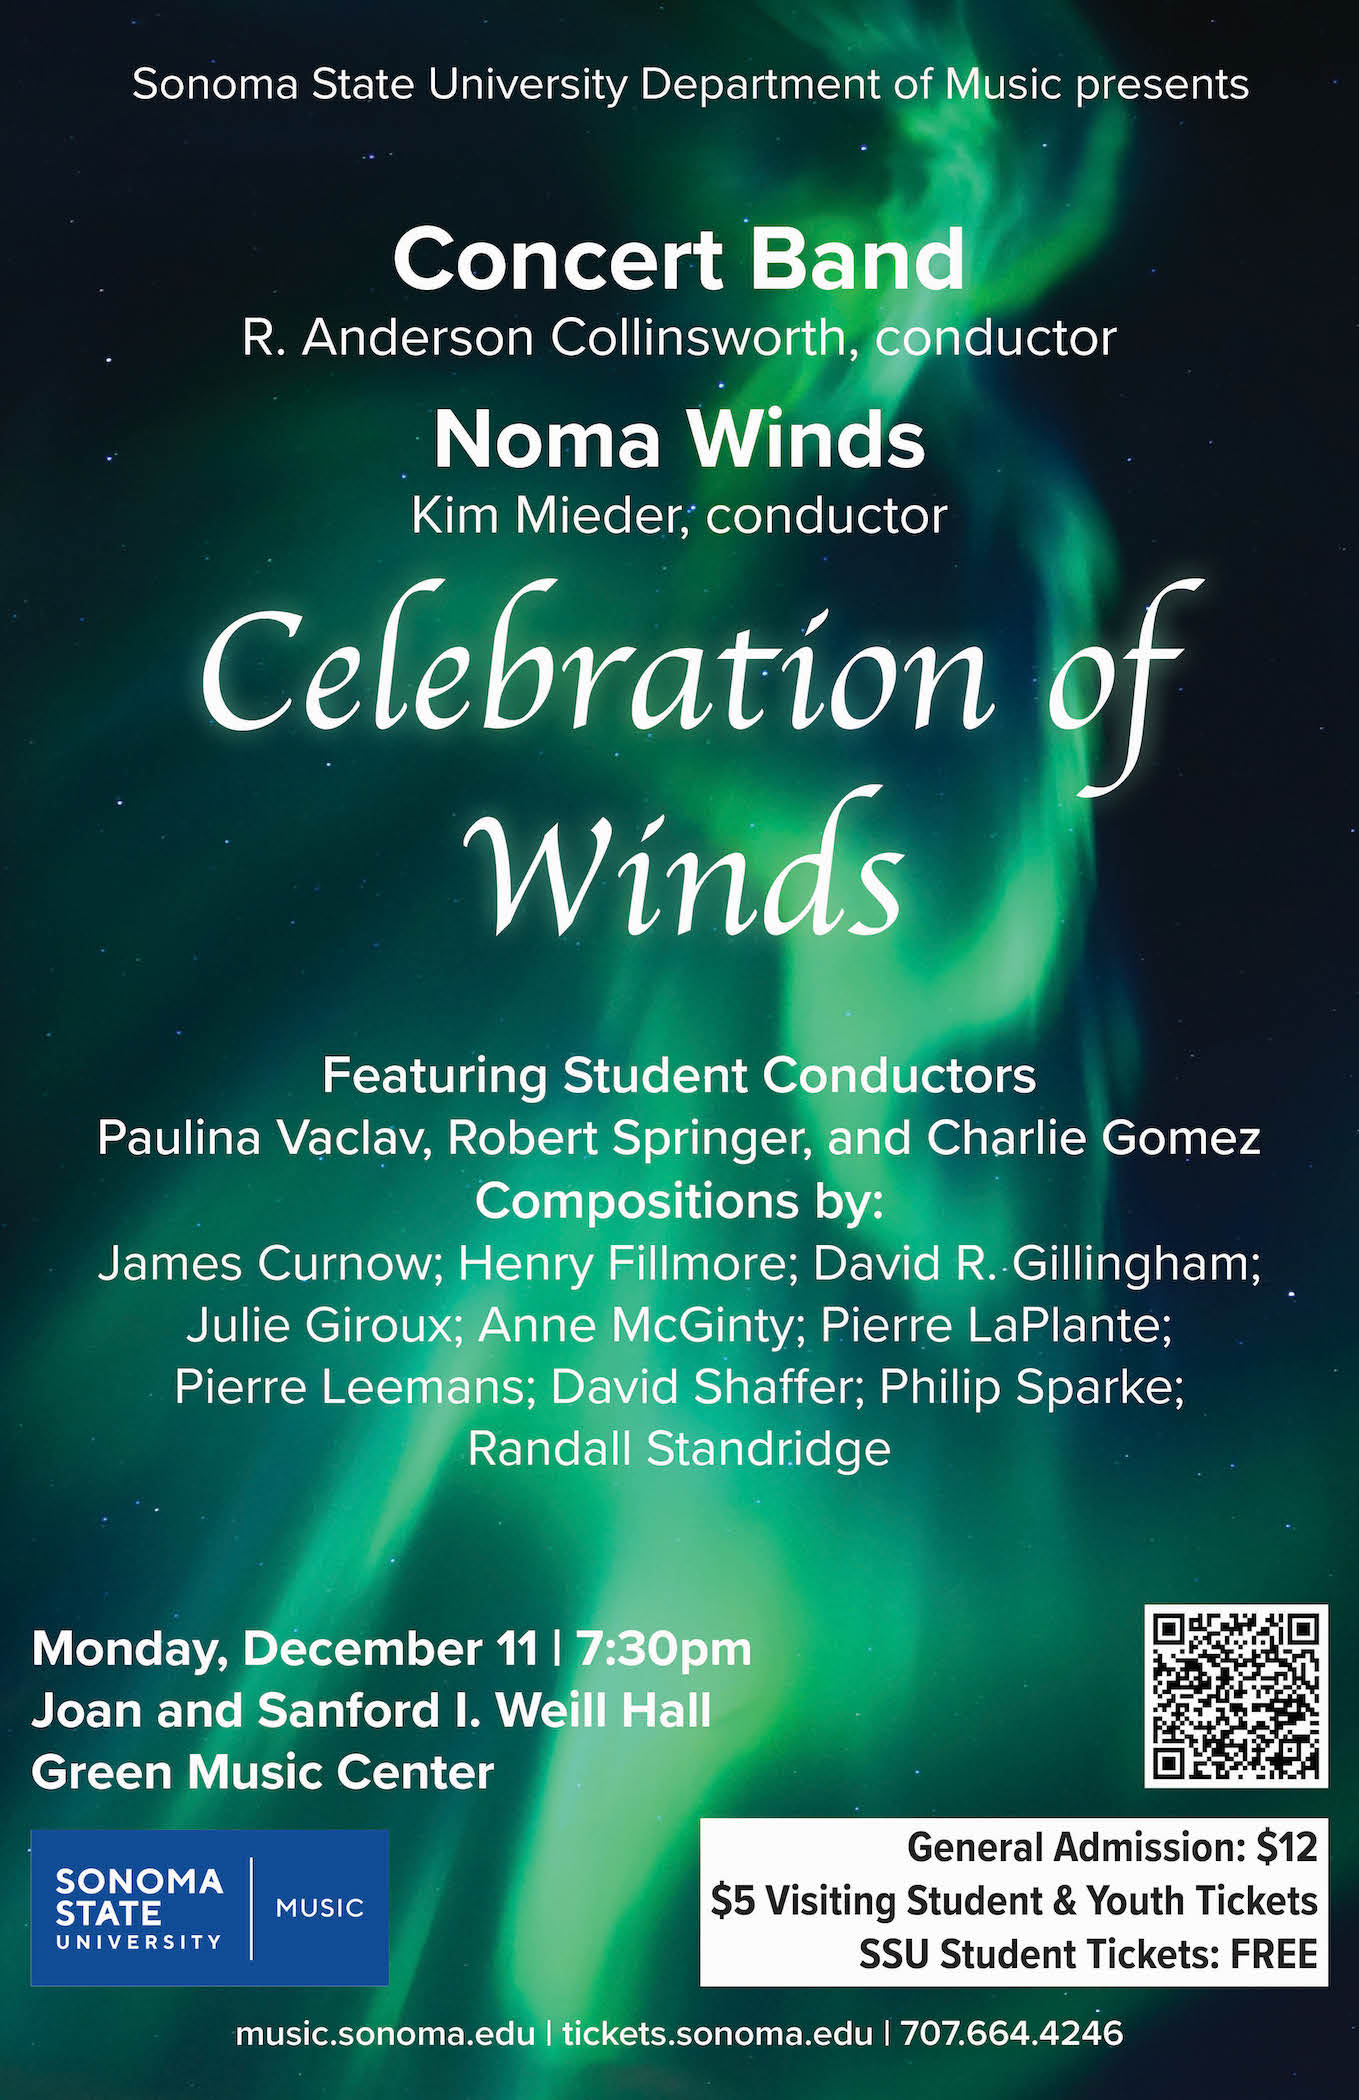 Celebration of Winds with northern lights poster